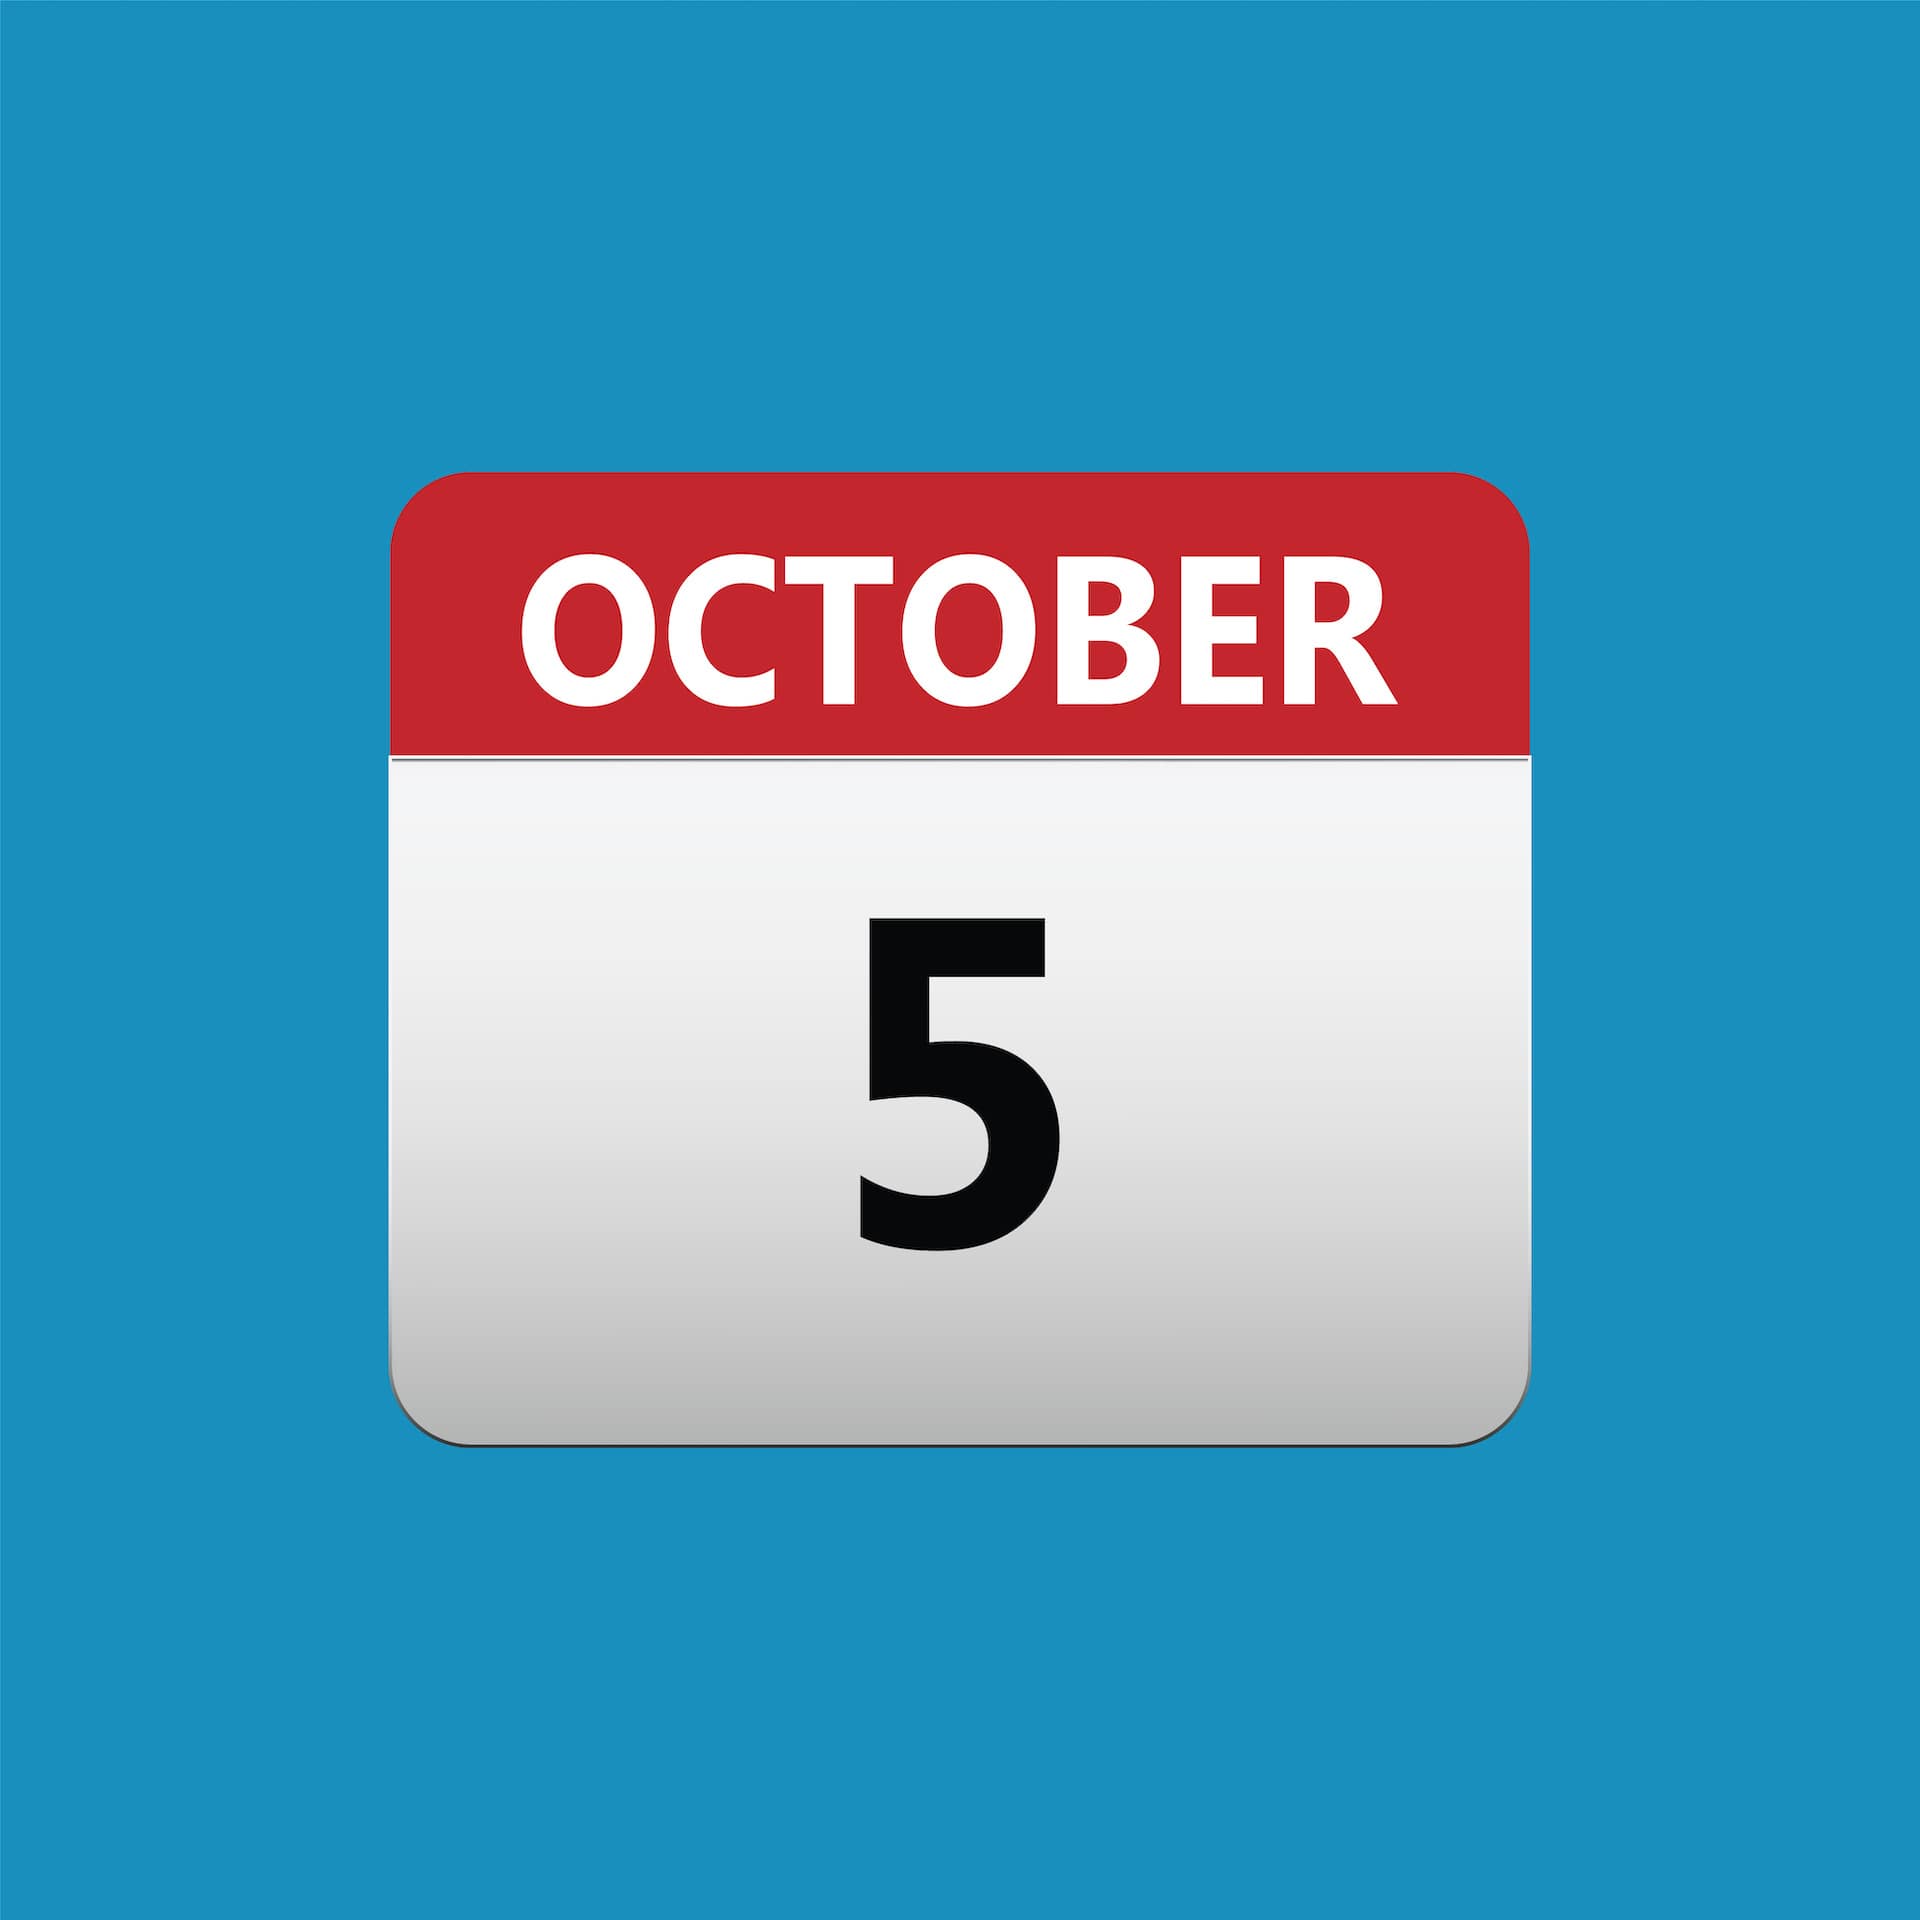 Register for Selfassessment by October 5th Avoid Penalties and Plan Ahead